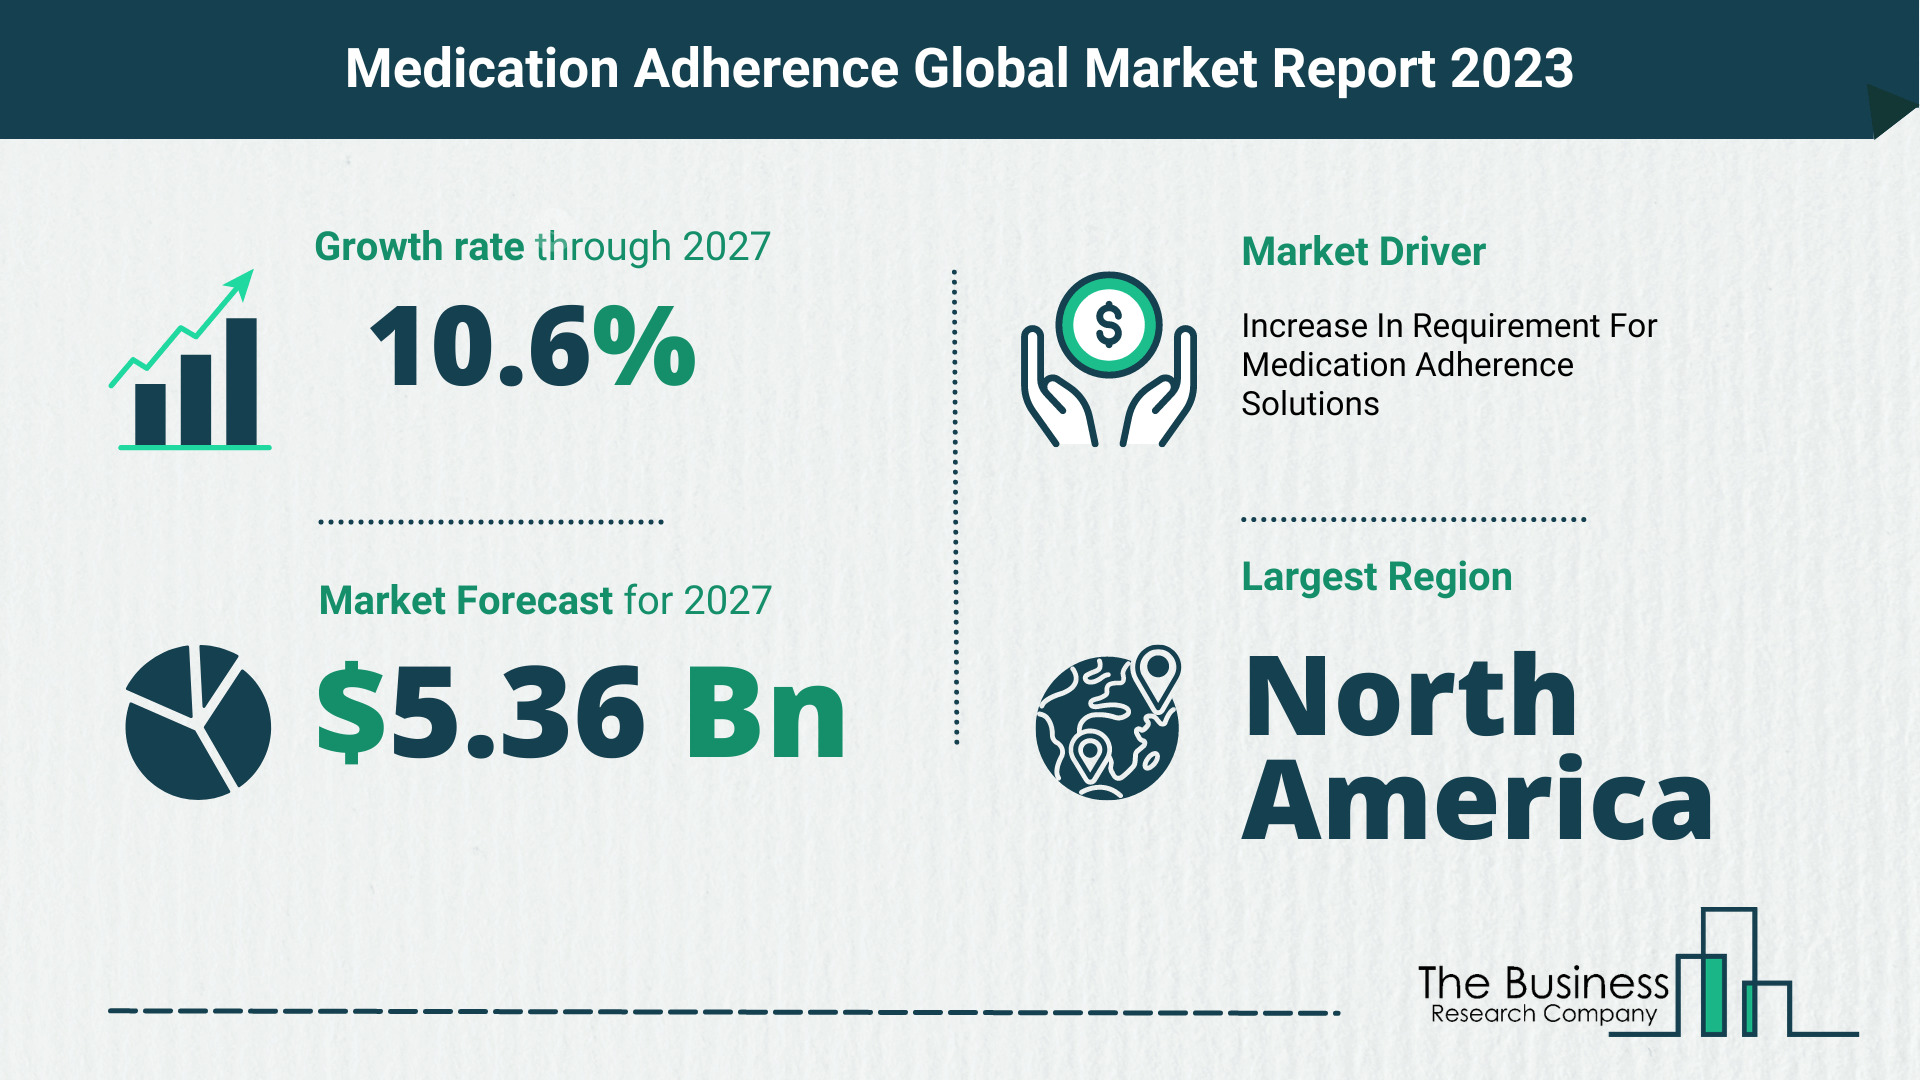 How Will The Medication Adherence Market Globally Expand In 2023?